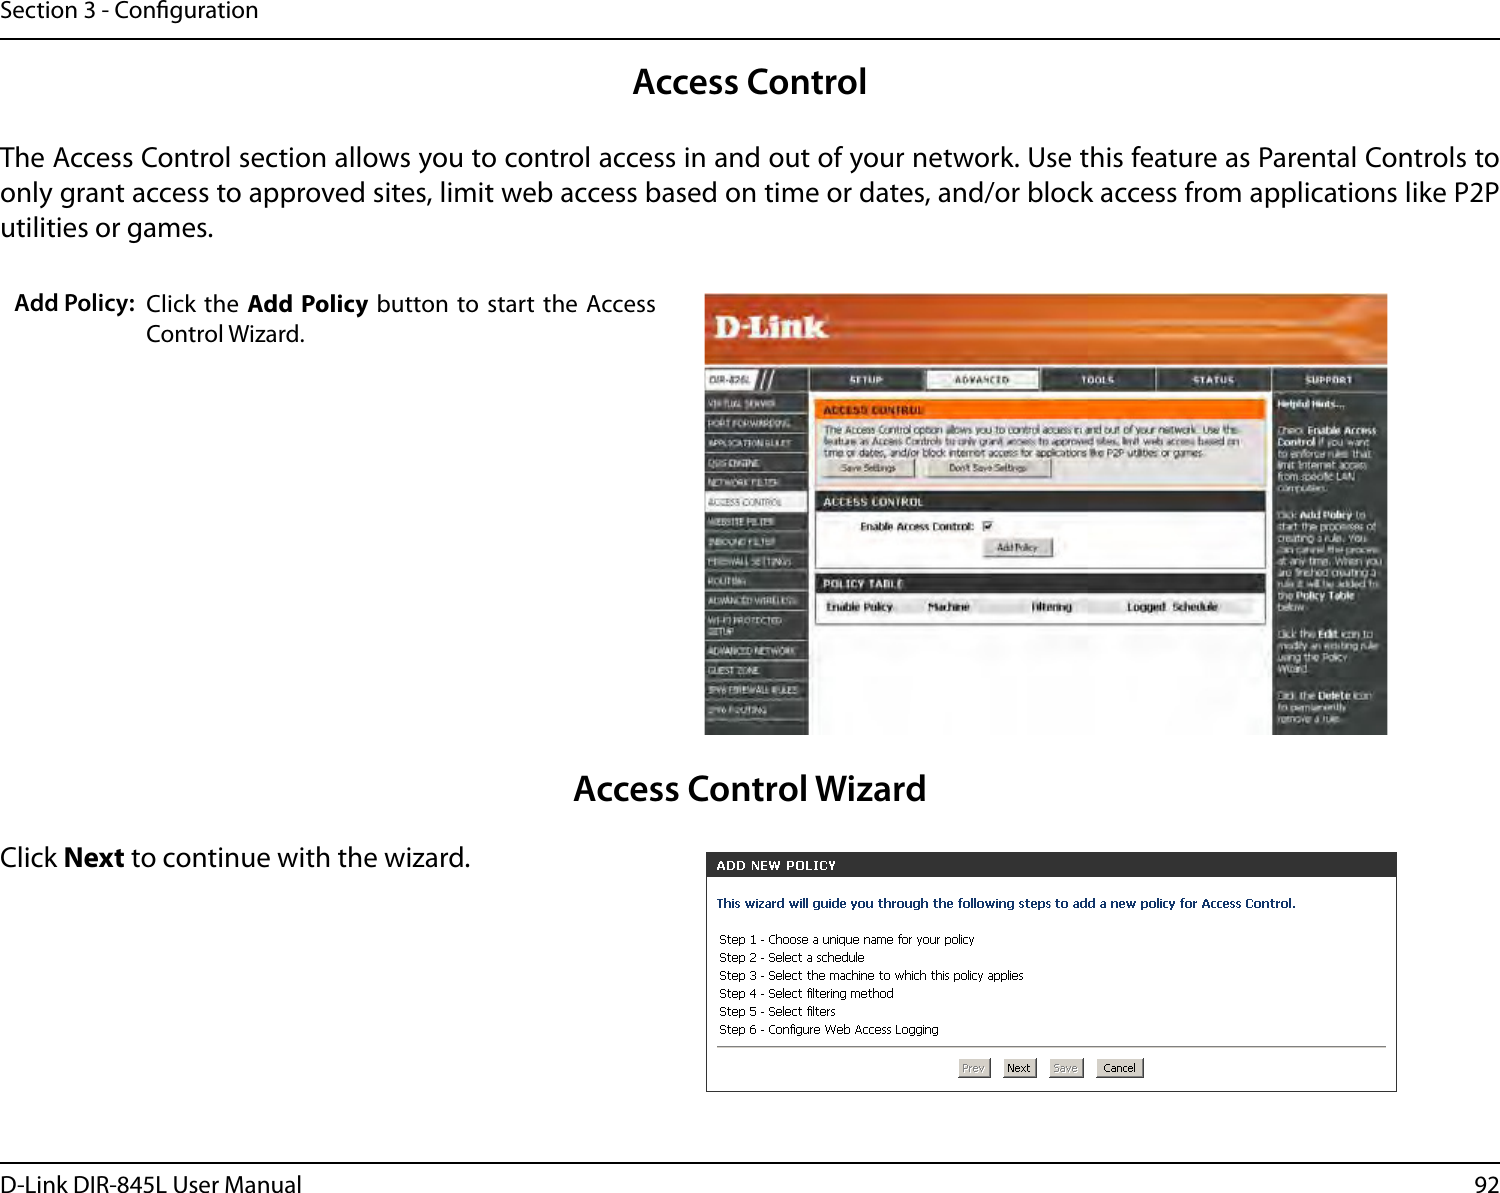 92D-Link DIR-845L User ManualSection 3 - CongurationAccess ControlClick the  Add Policy button to start the  Access Control Wizard. Add Policy:The Access Control section allows you to control access in and out of your network. Use this feature as Parental Controls to only grant access to approved sites, limit web access based on time or dates, and/or block access from applications like P2P utilities or games.Click Next to continue with the wizard.Access Control Wizard